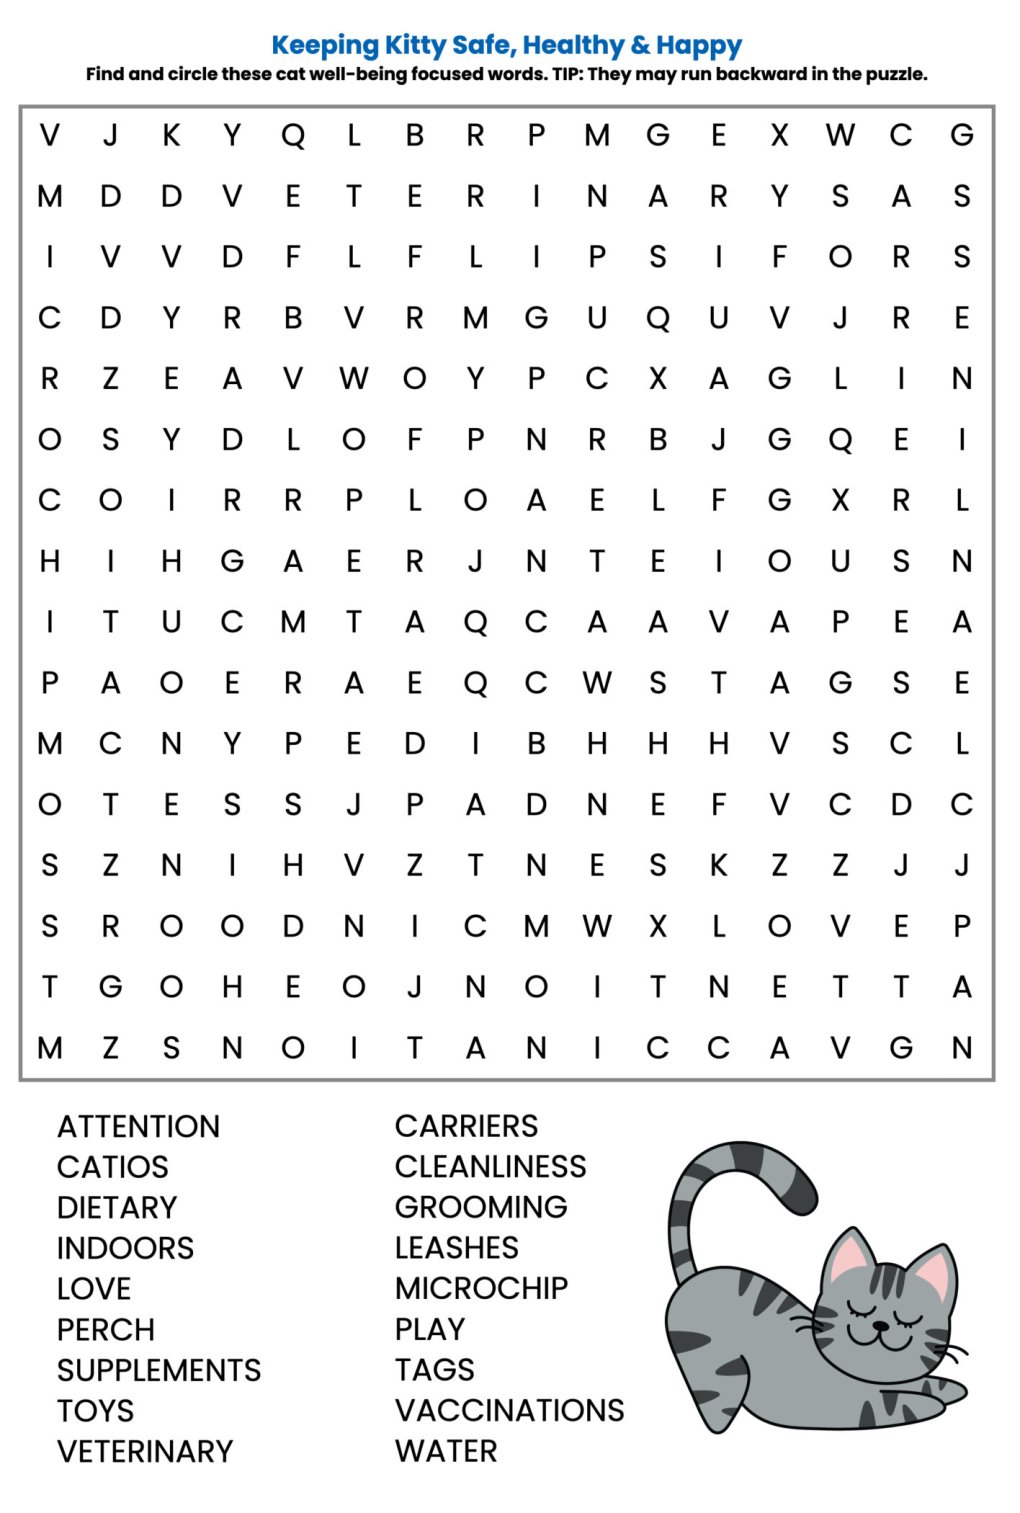 Weekly Cat Word Puzzle – Keeping Kitty Save, Healthy & Happy